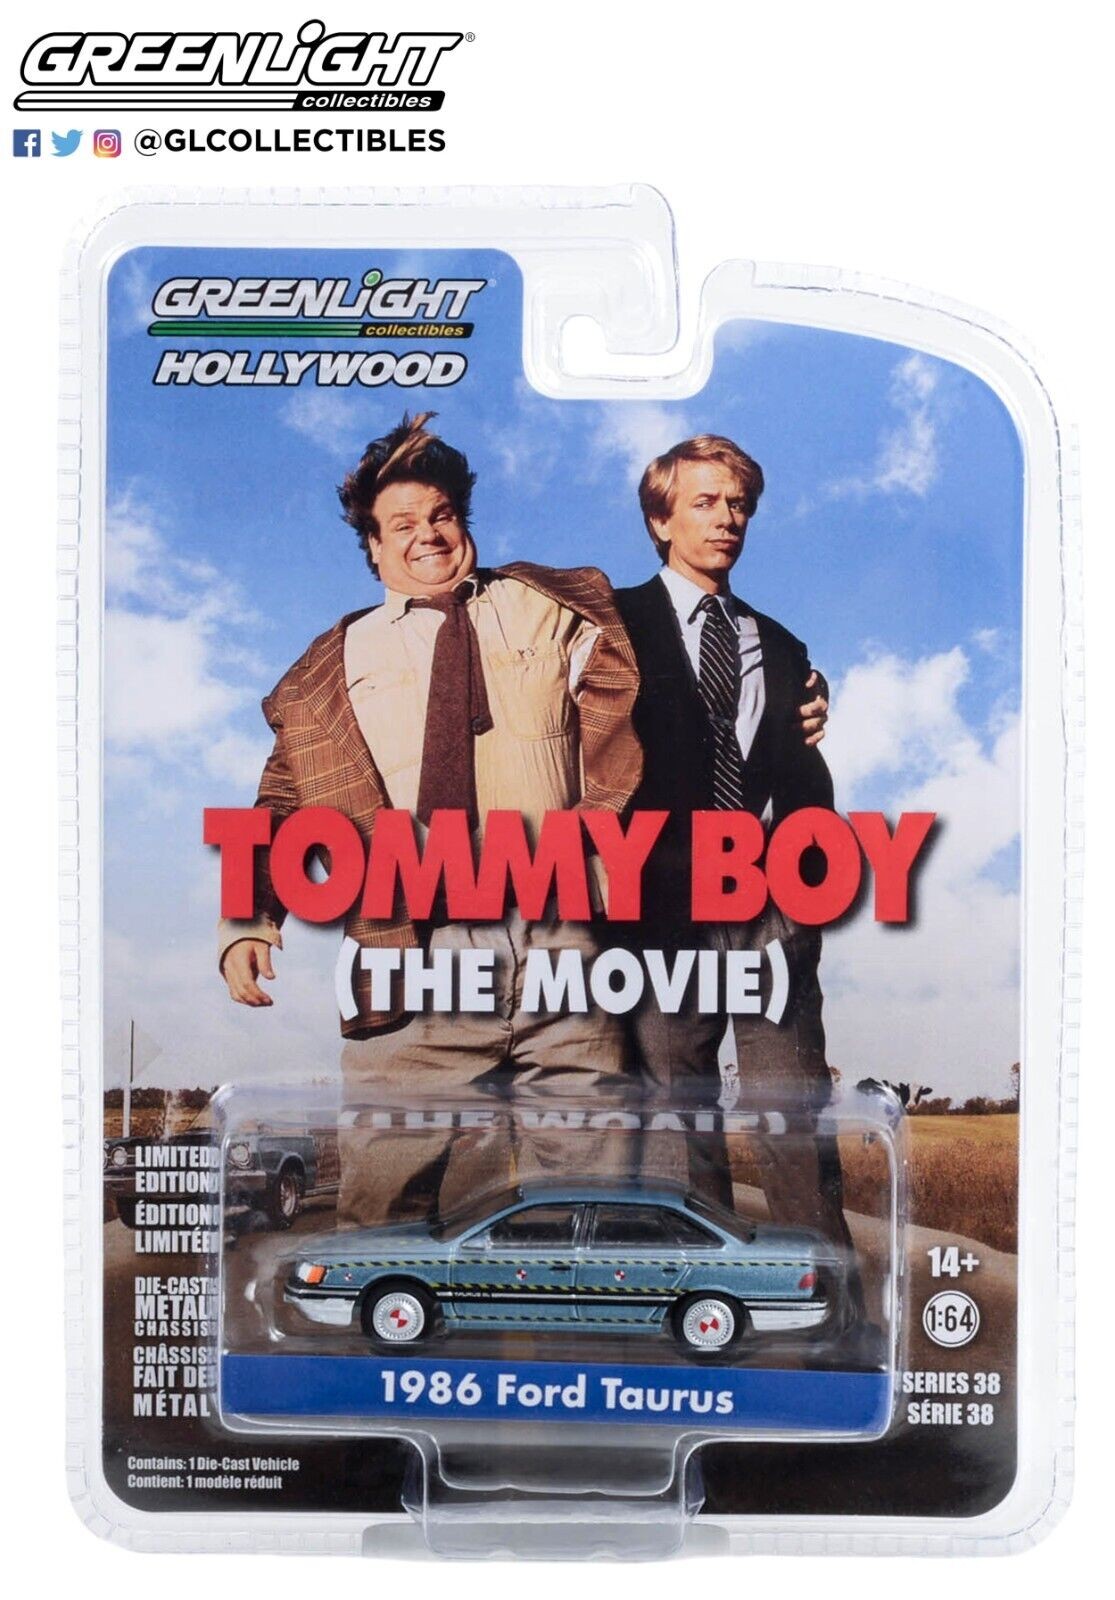 Greenlight 1:64 Hollywood Series 38, Tommy Boy the Movie 1986 Ford Taurus